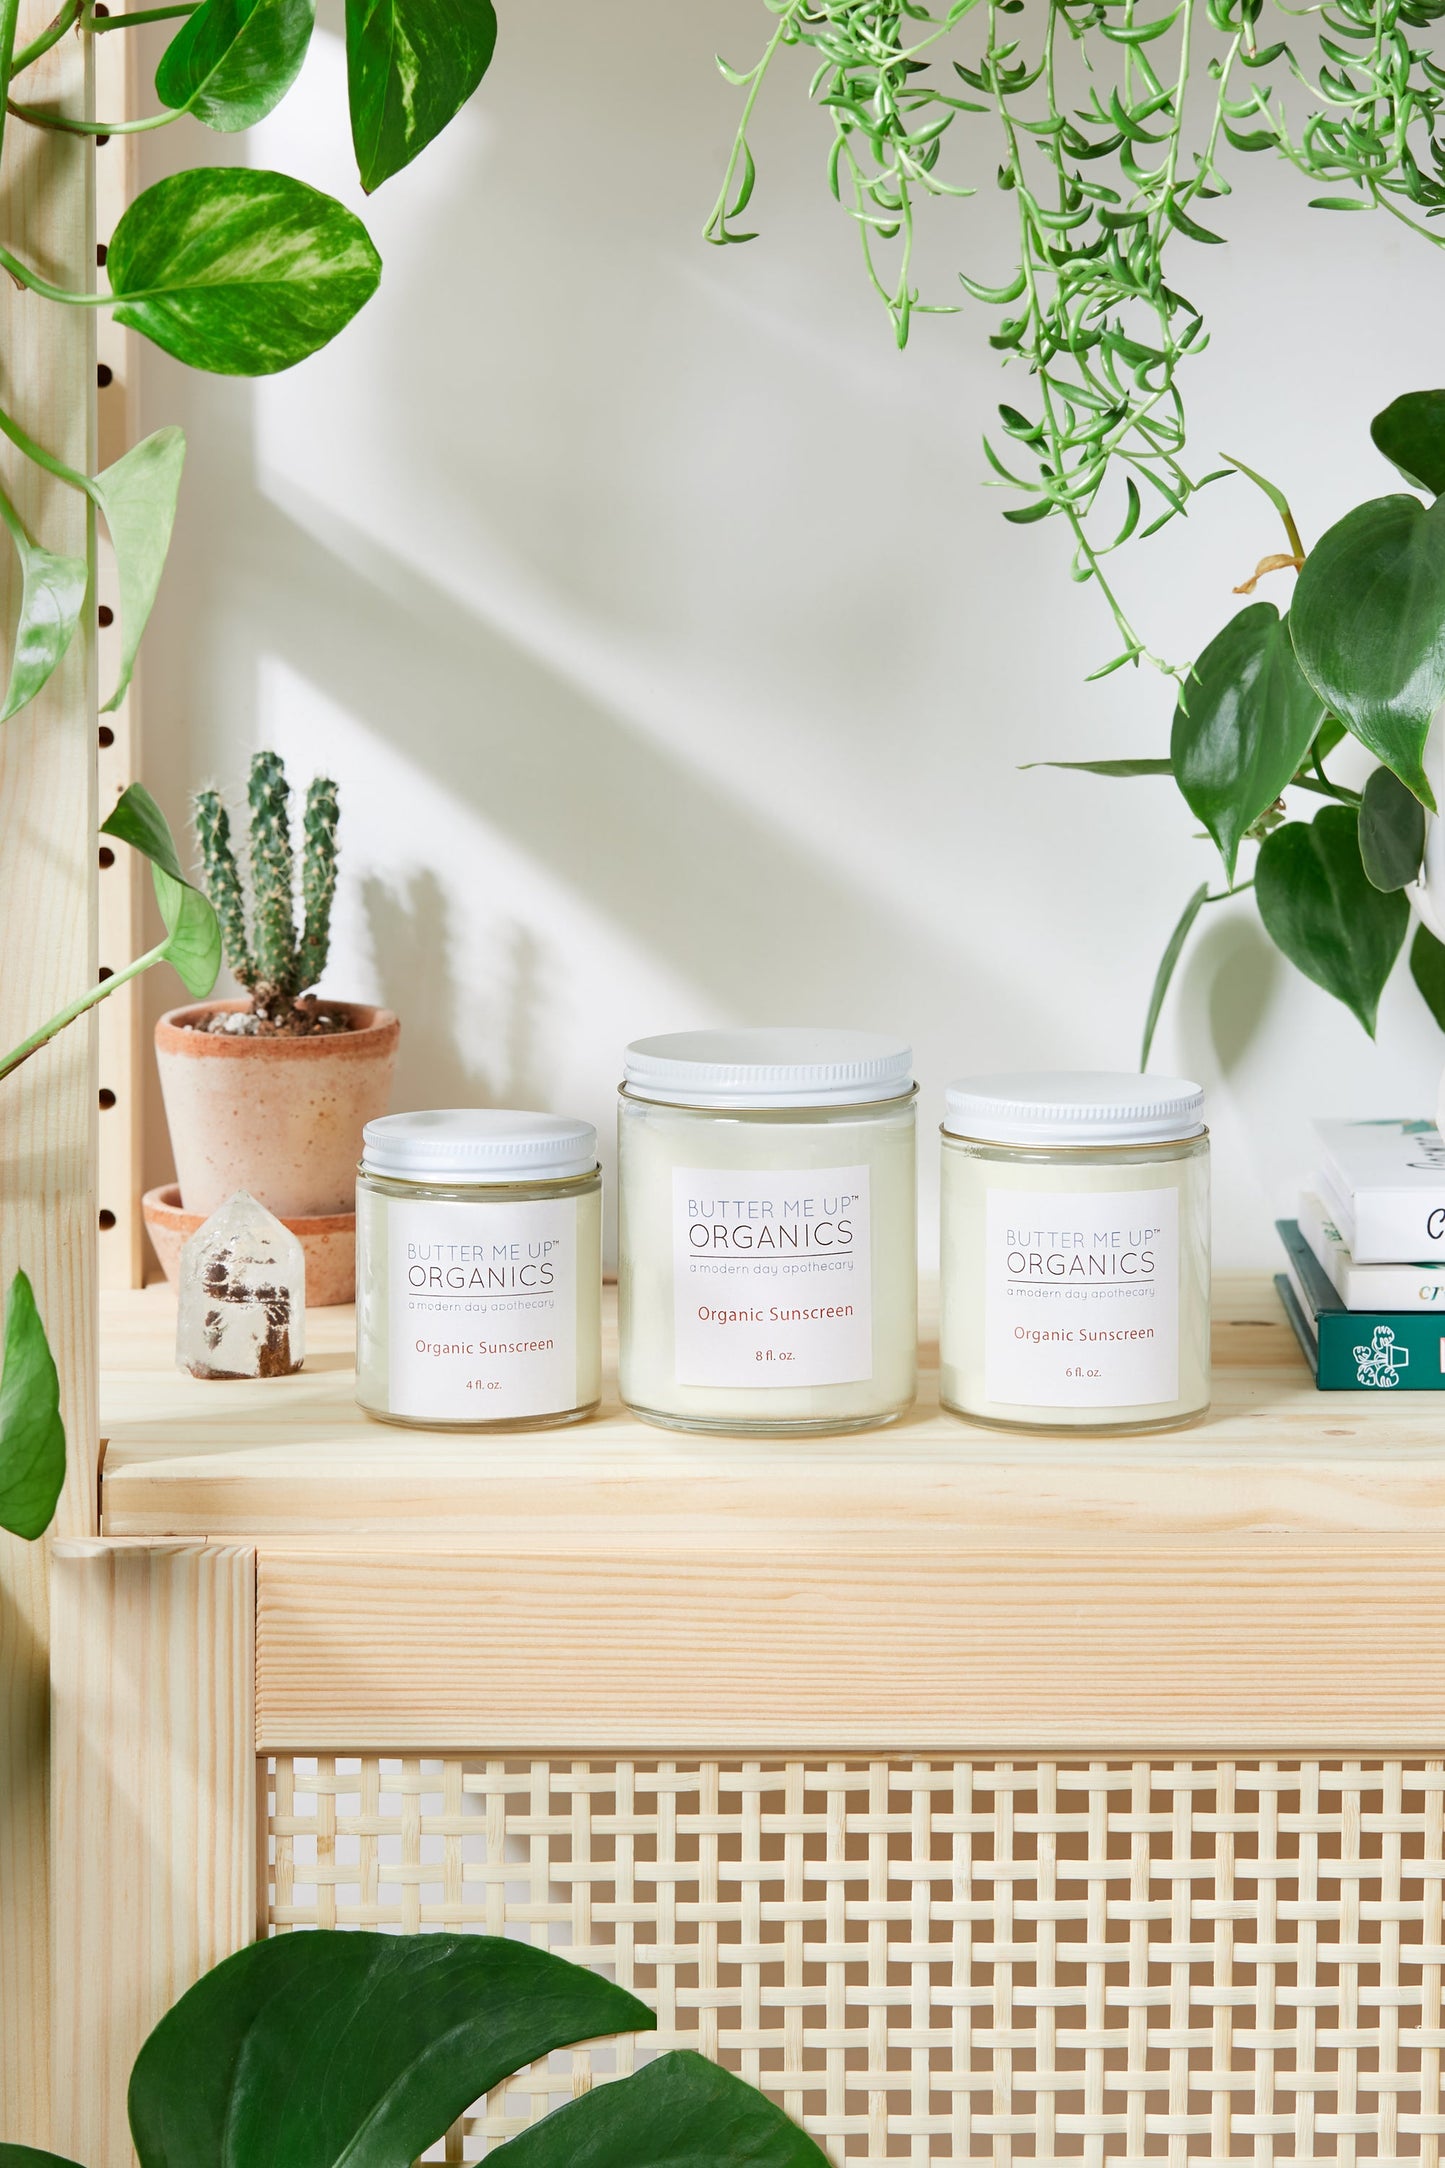 A shelf full of candles and plants on a shelf, with no toxic chemicals or White Smokey Natural Organic Sunscreen, Safe Sunscreen or Non-Nano Zinc Oxide SPF 45 Sunscreen present.